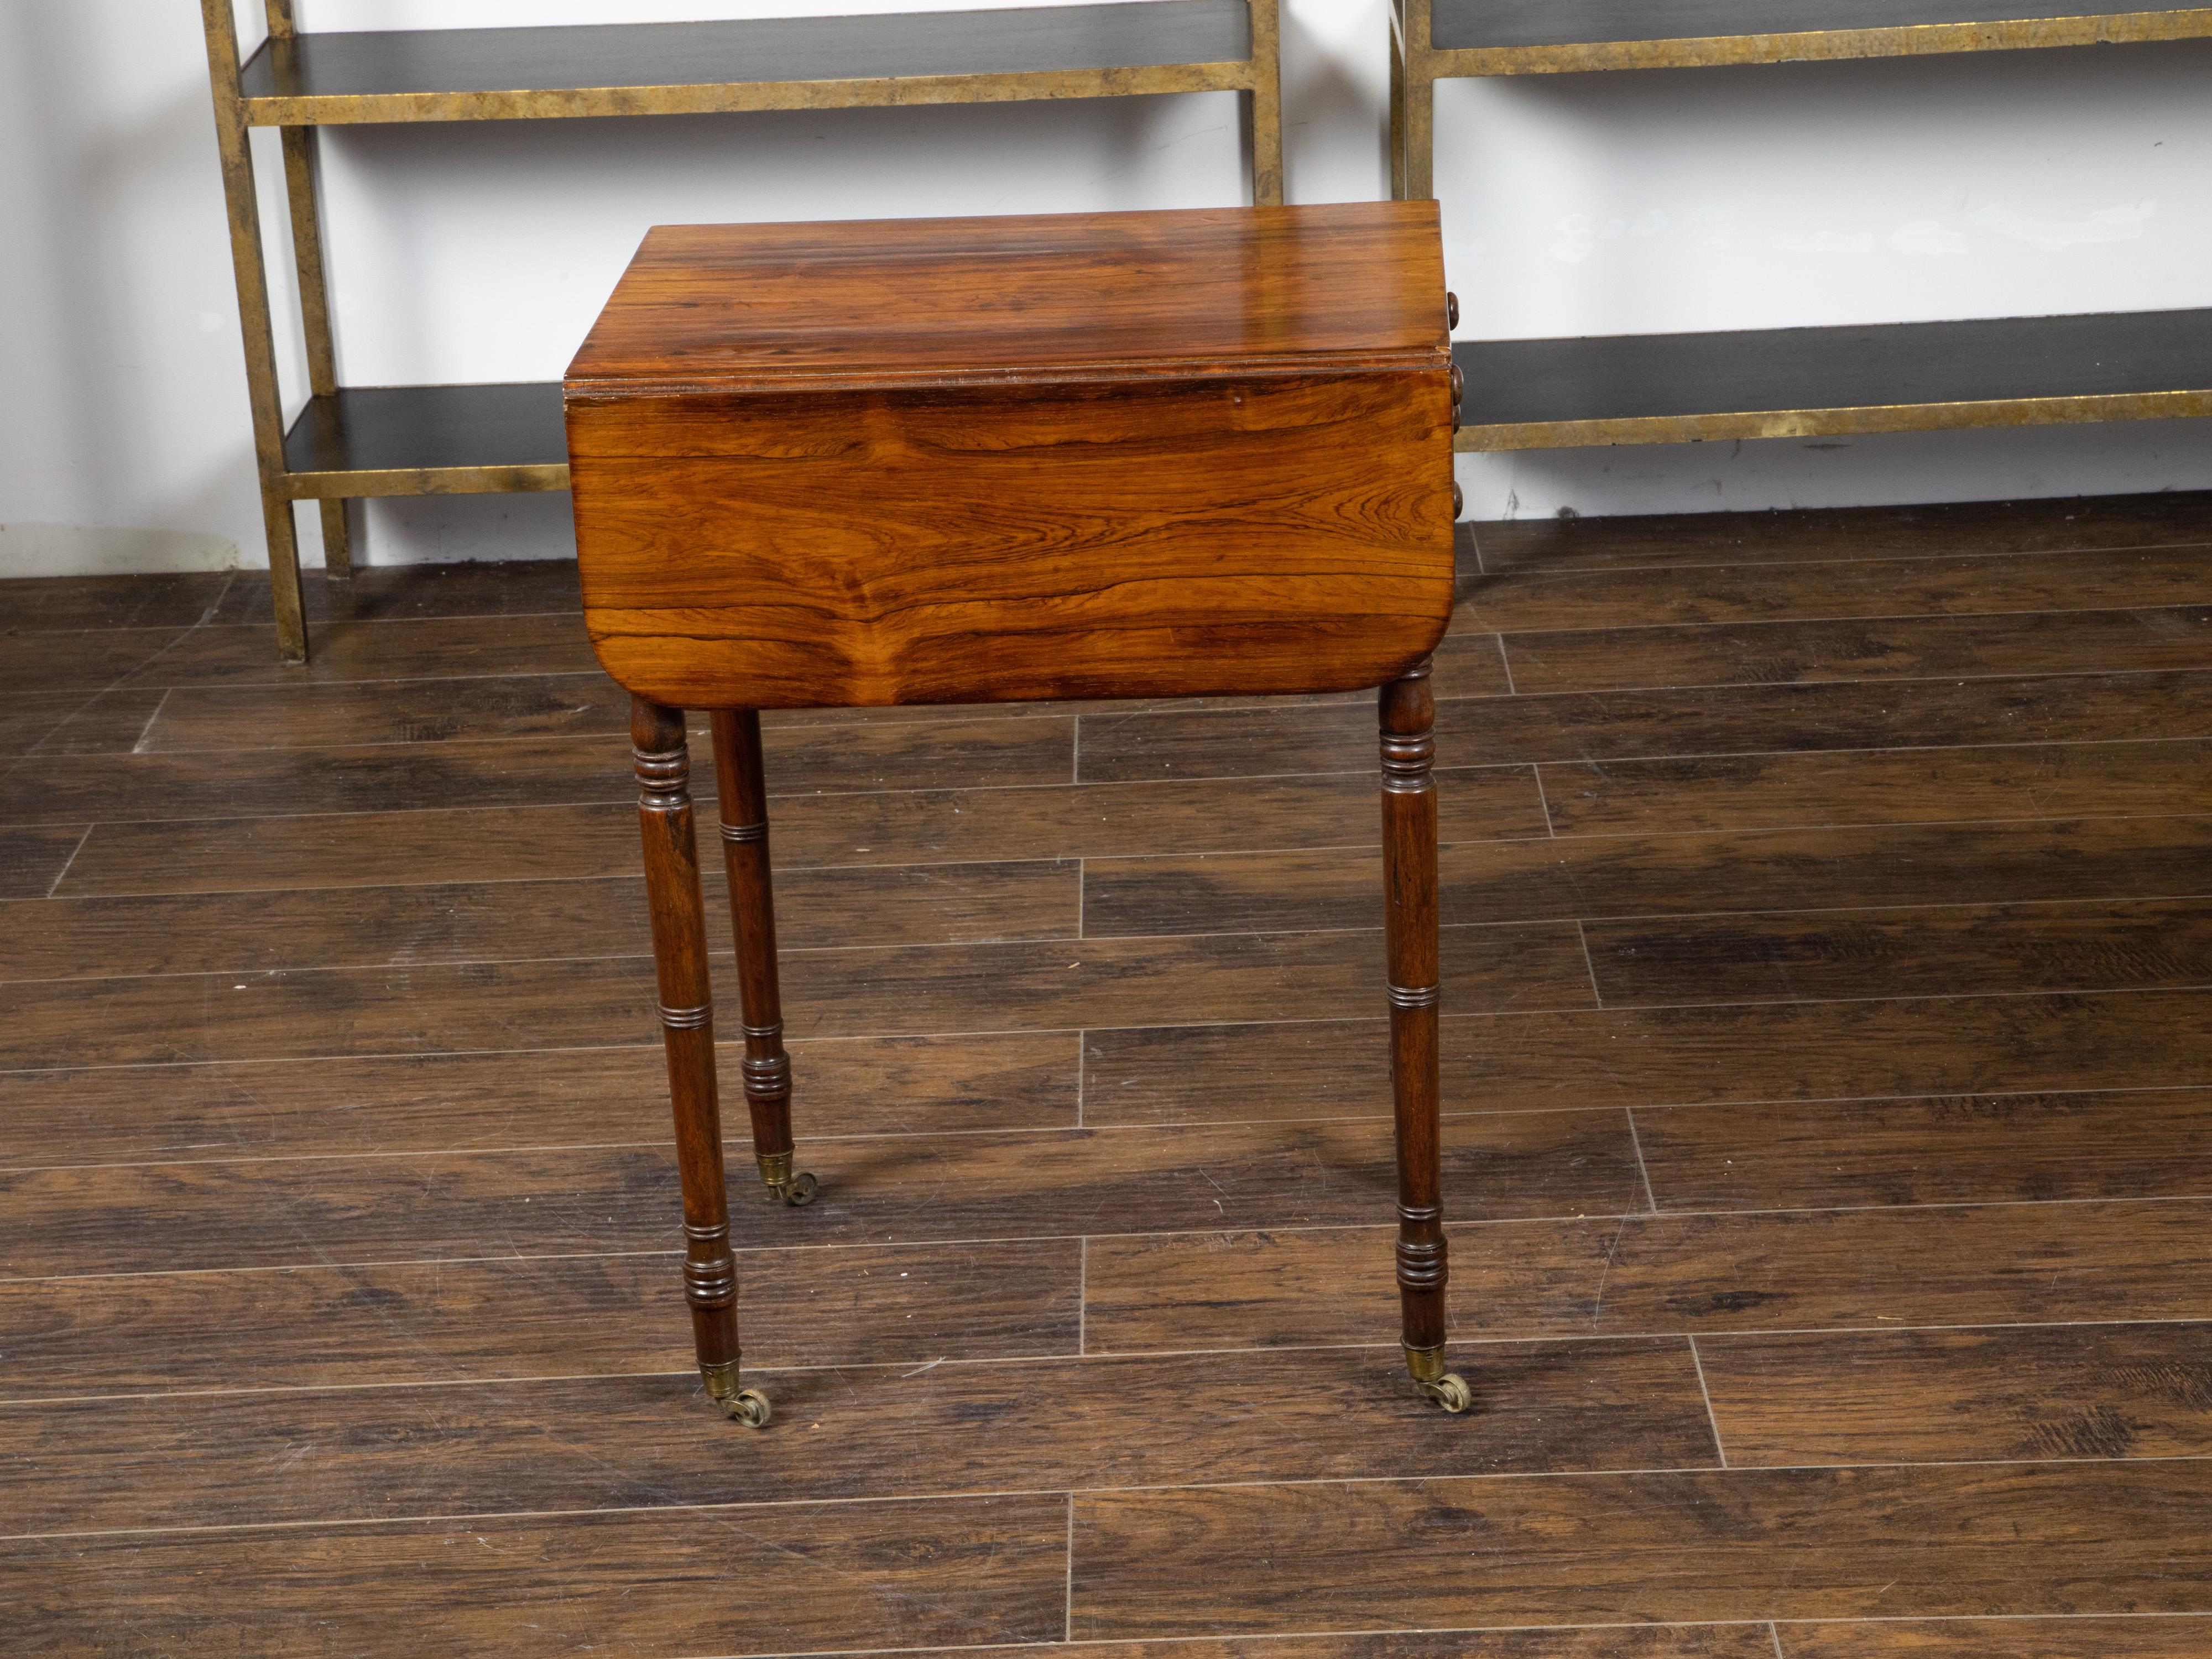 English Regency 1820s Mahogany Pembroke Table with Drop Leaves and Drawers For Sale 2